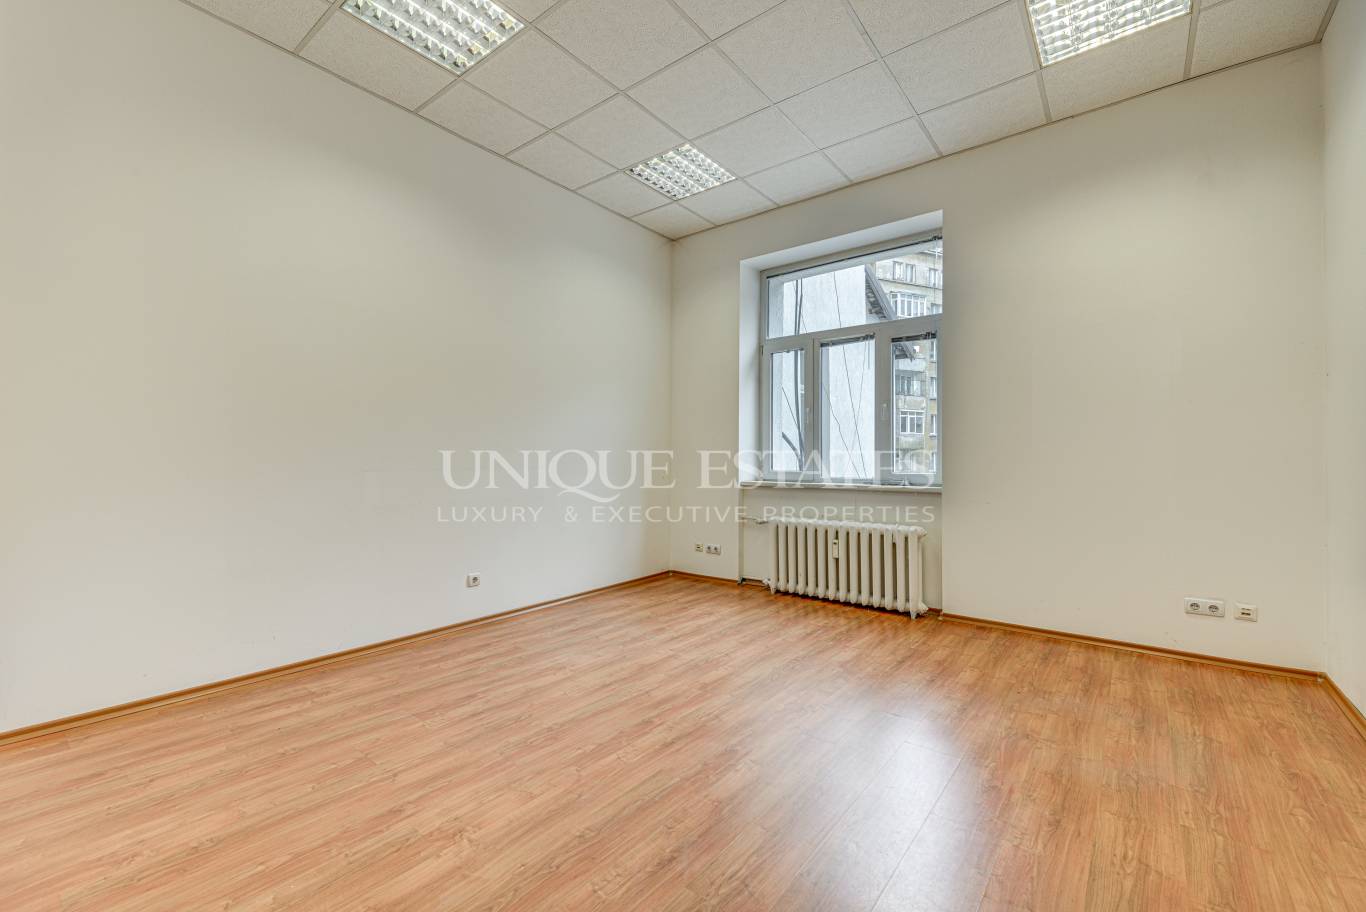 Office for rent in Sofia, Downtown with listing ID: K4831 - image 11